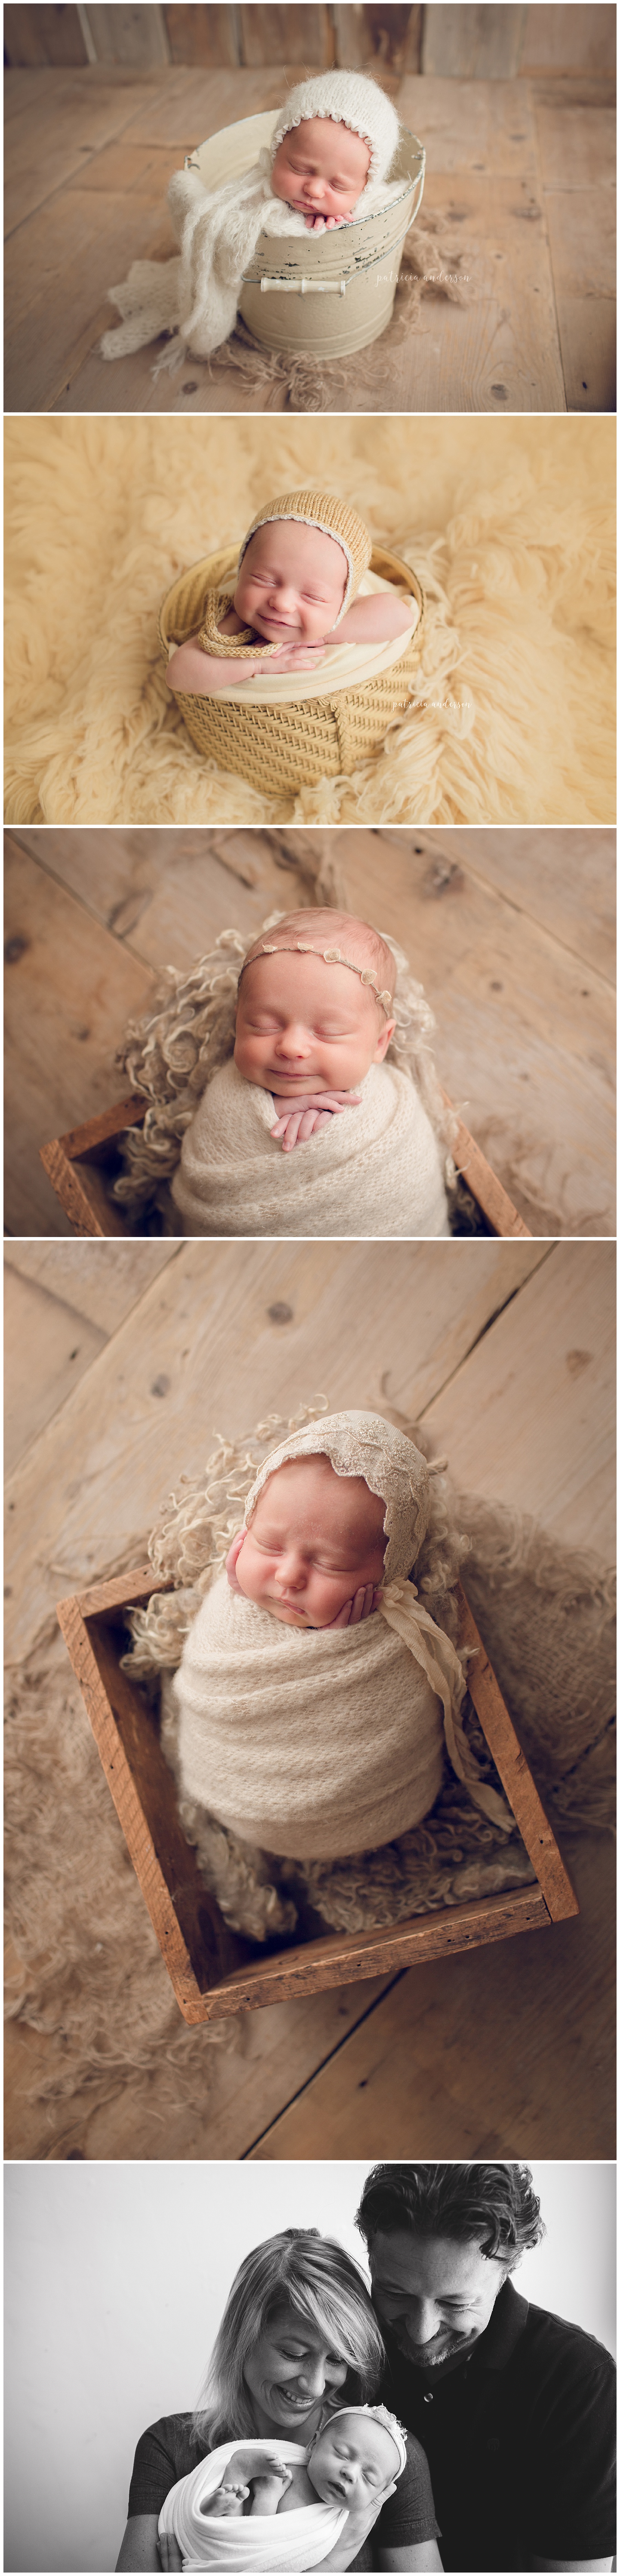 Parker | Chicago Newborn Photographer | Patricia Anderson Photography